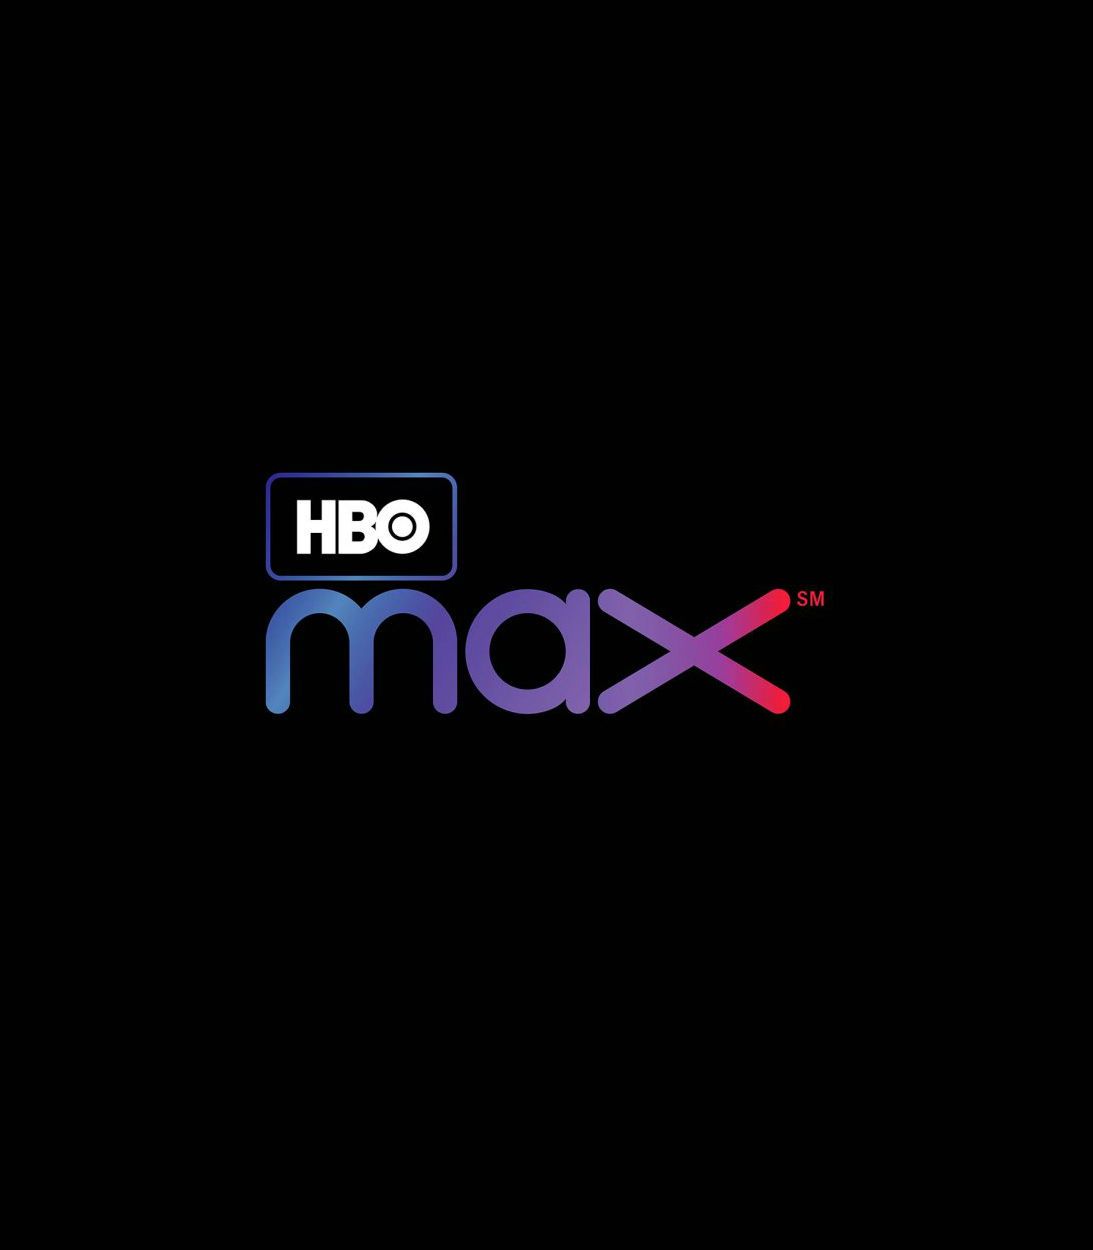 HBO Max launches May 2020